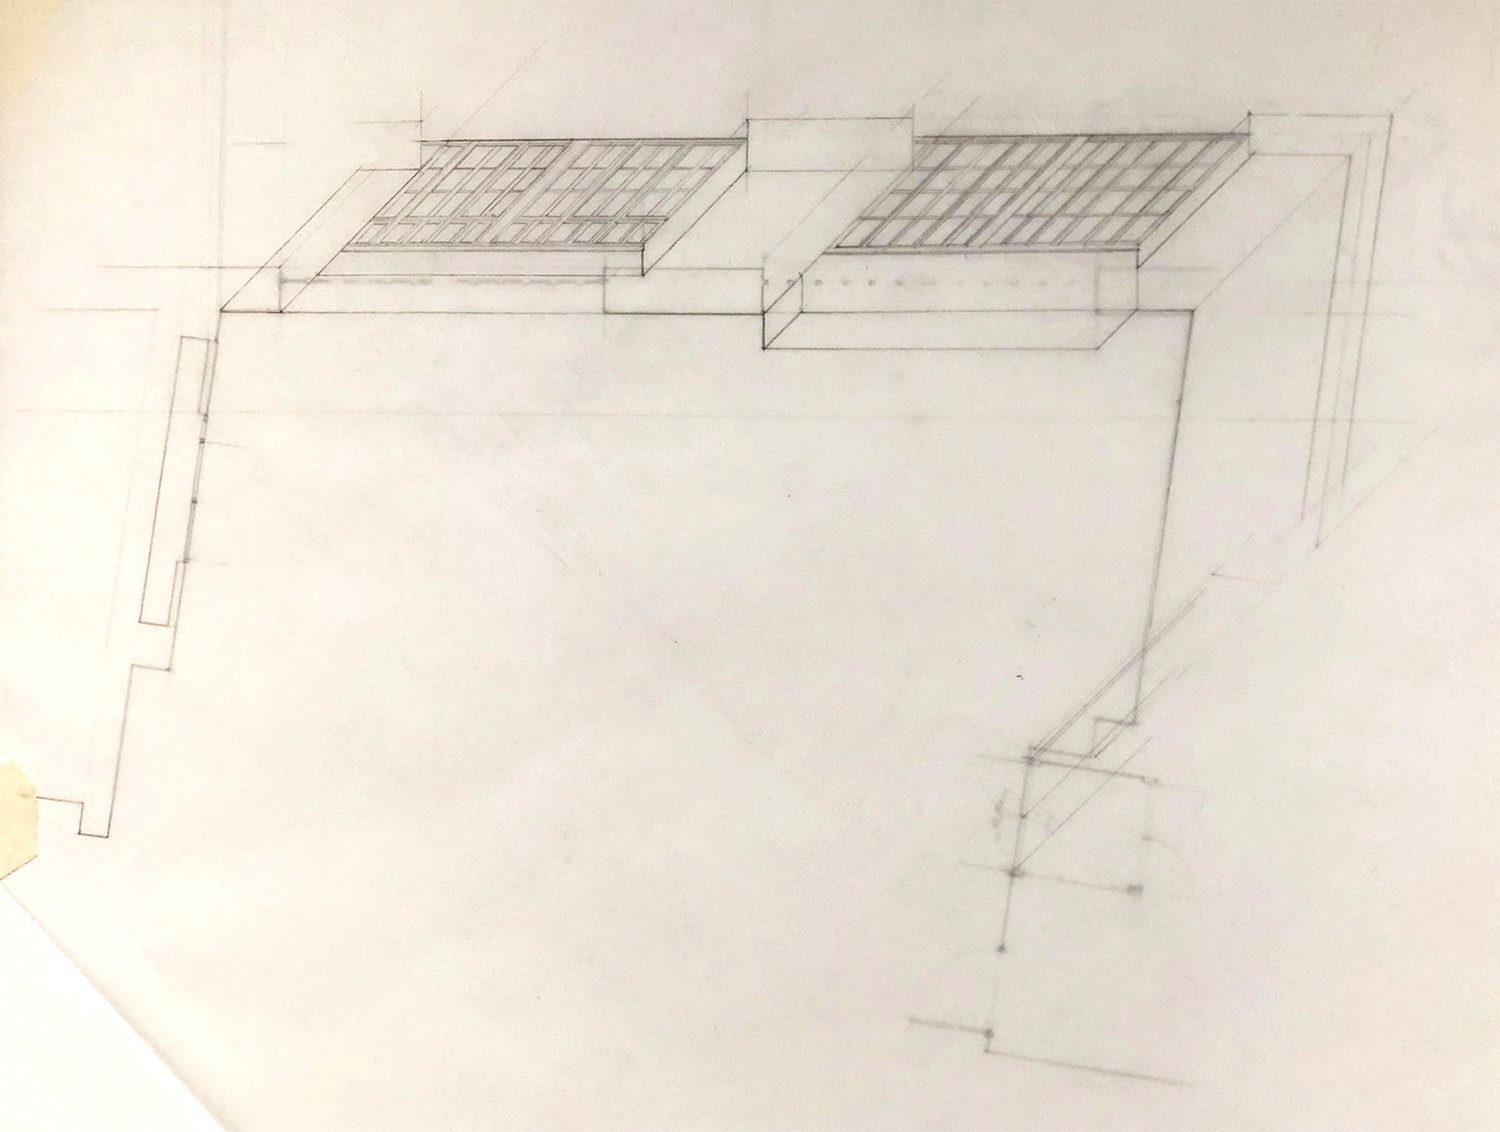 An axonometric pencil drawing of a section of a room inside the university. A series of large windows can be seen, including multiple divisions